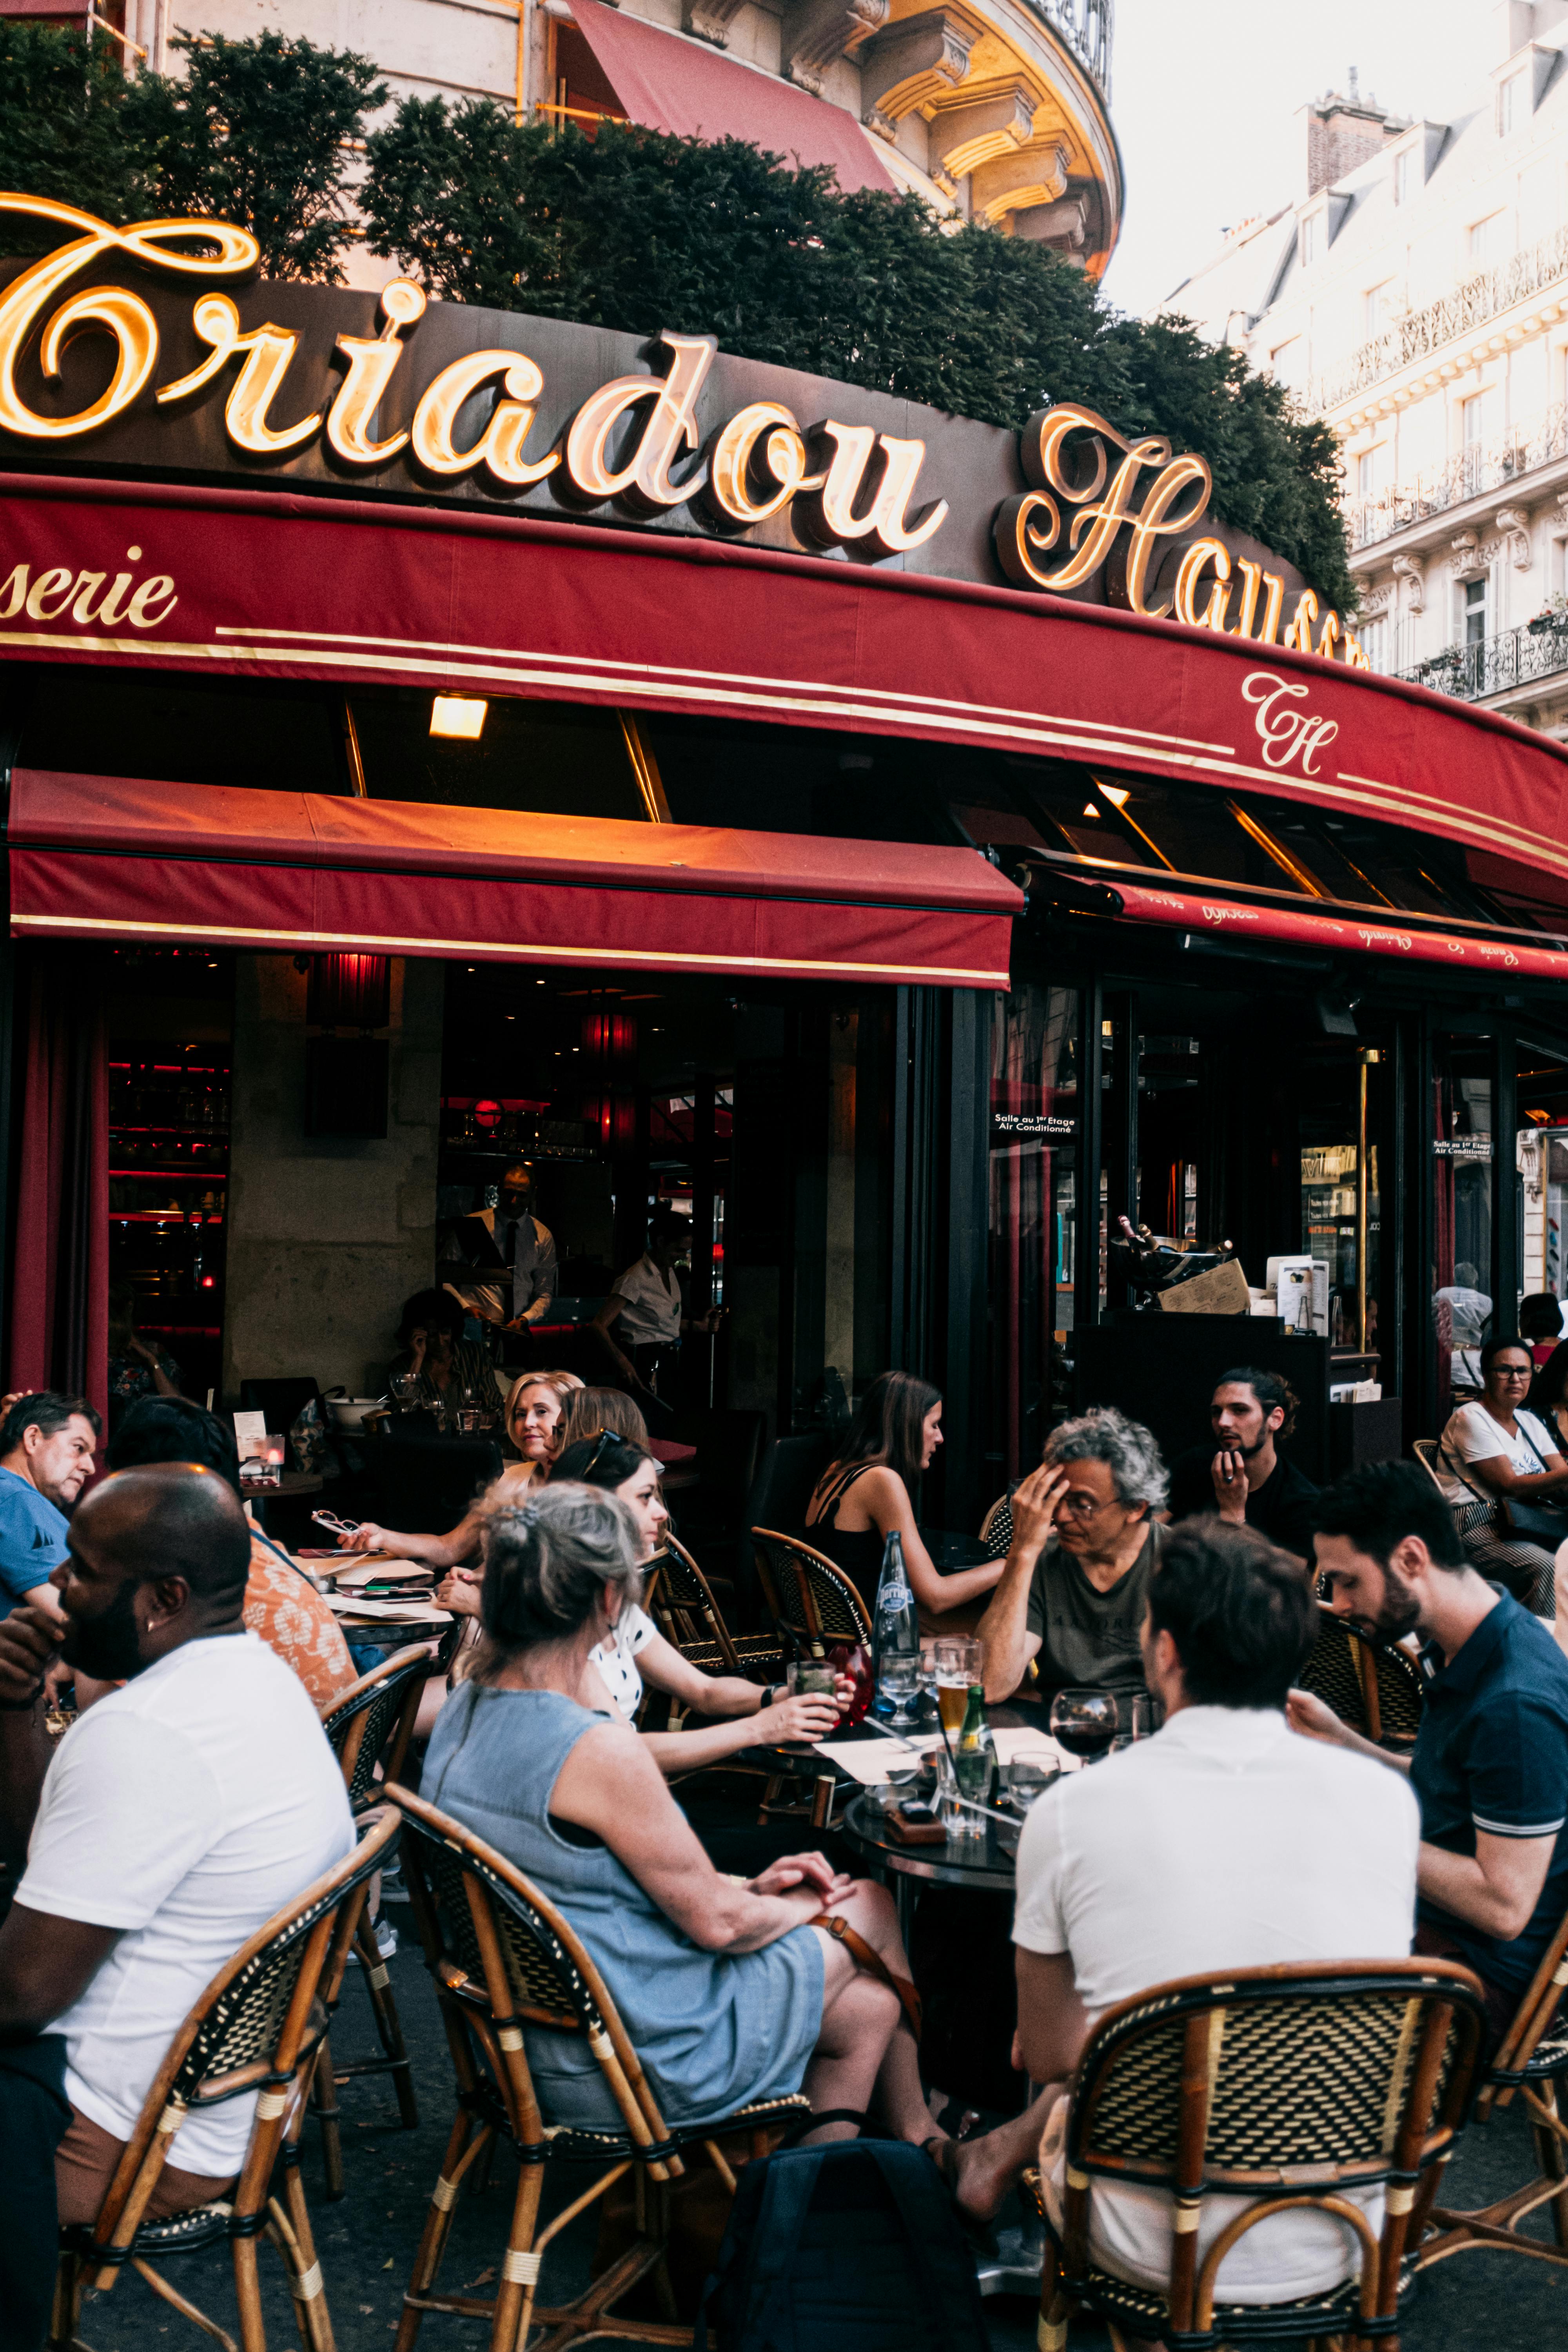 People Sitting on Chair Outside Restaurant · Free Stock Photo - 4000 x 6000 jpeg 3664kB